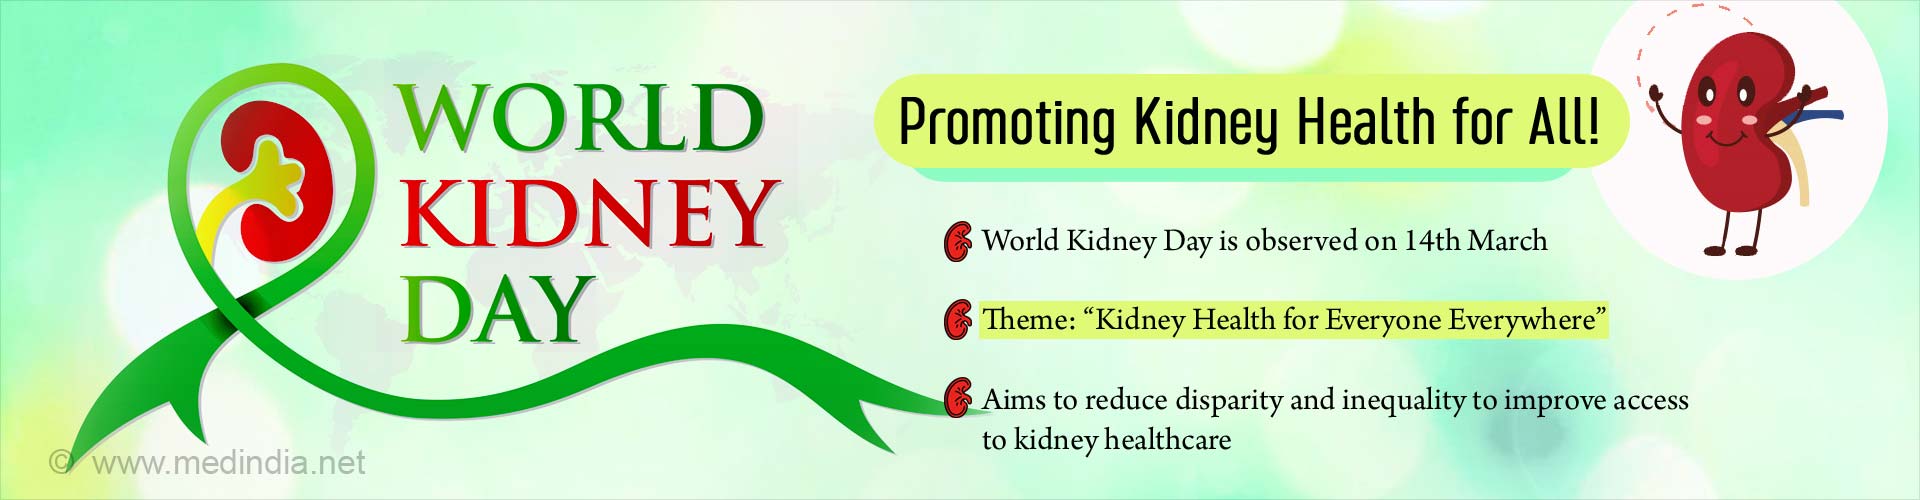 World Kidney Day ‘Kidney Health for Everyone Everywhere’